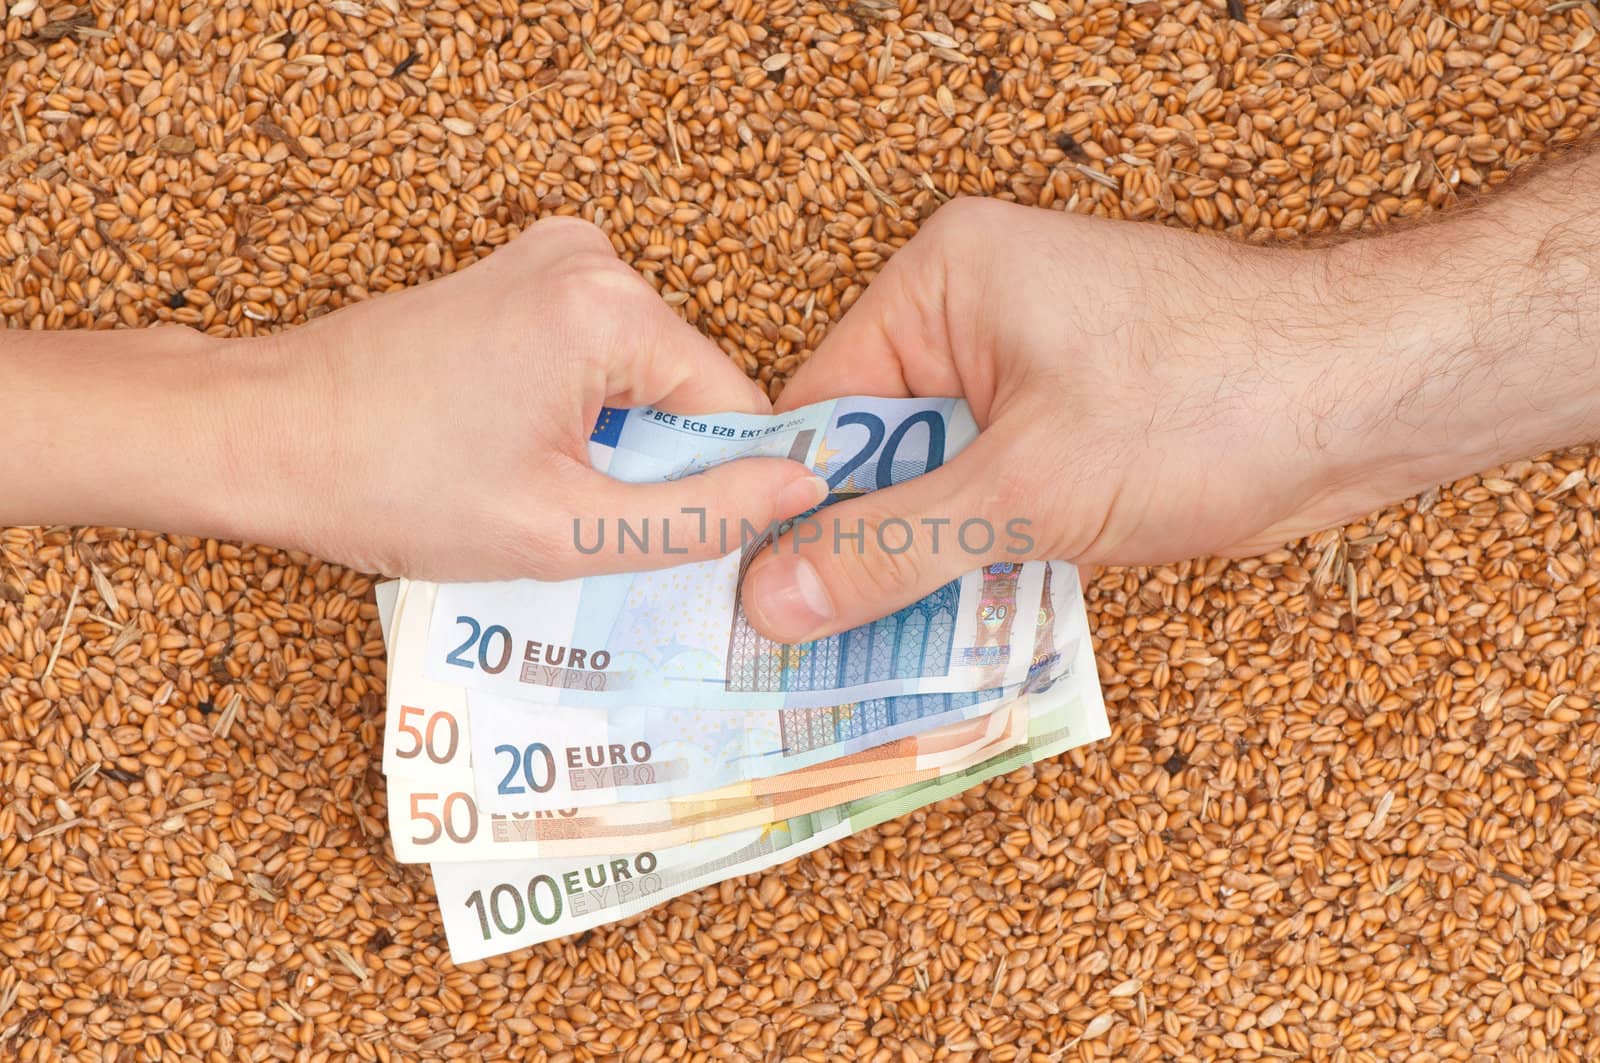 The businessman pays delivery of wheat by euro